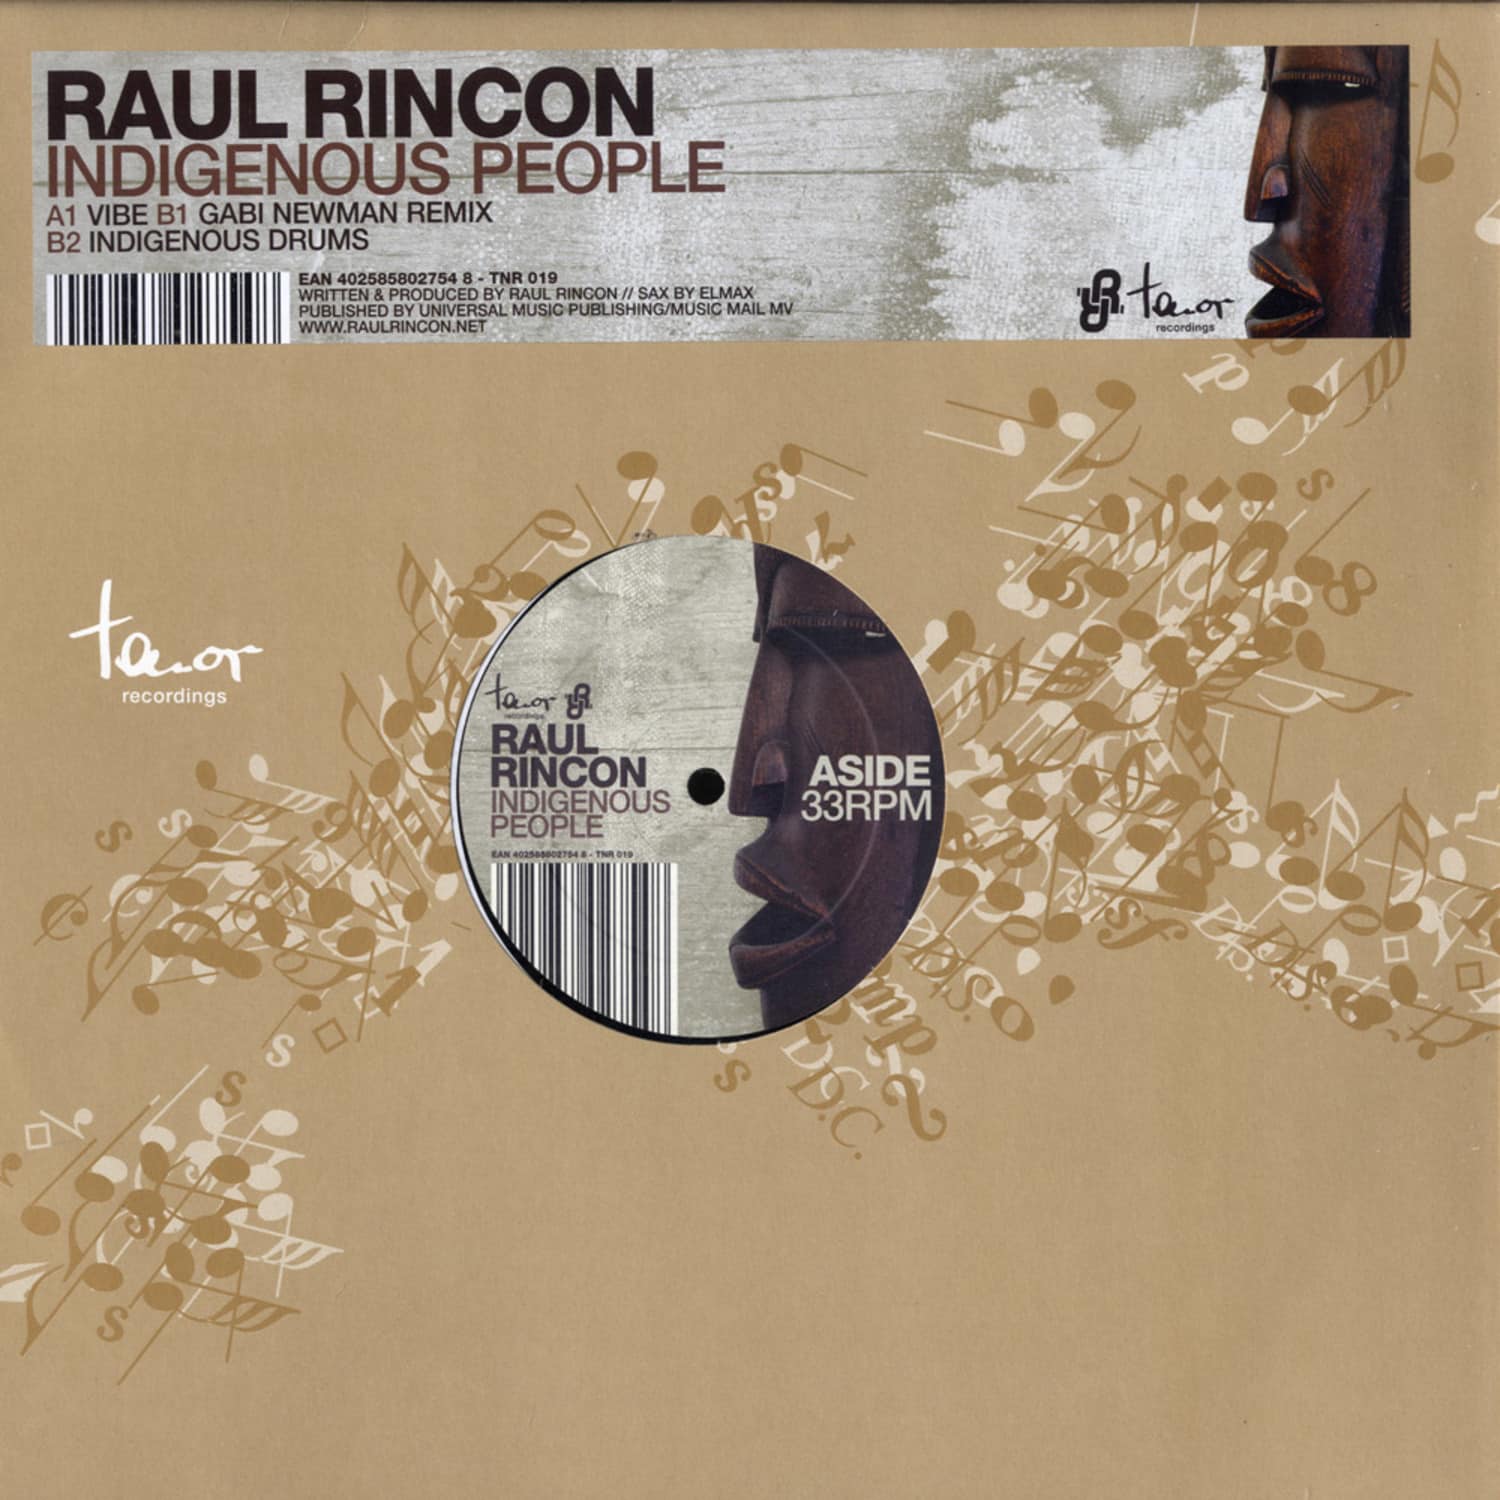 Raul Rincon - INDIGENOUS PEOPLE